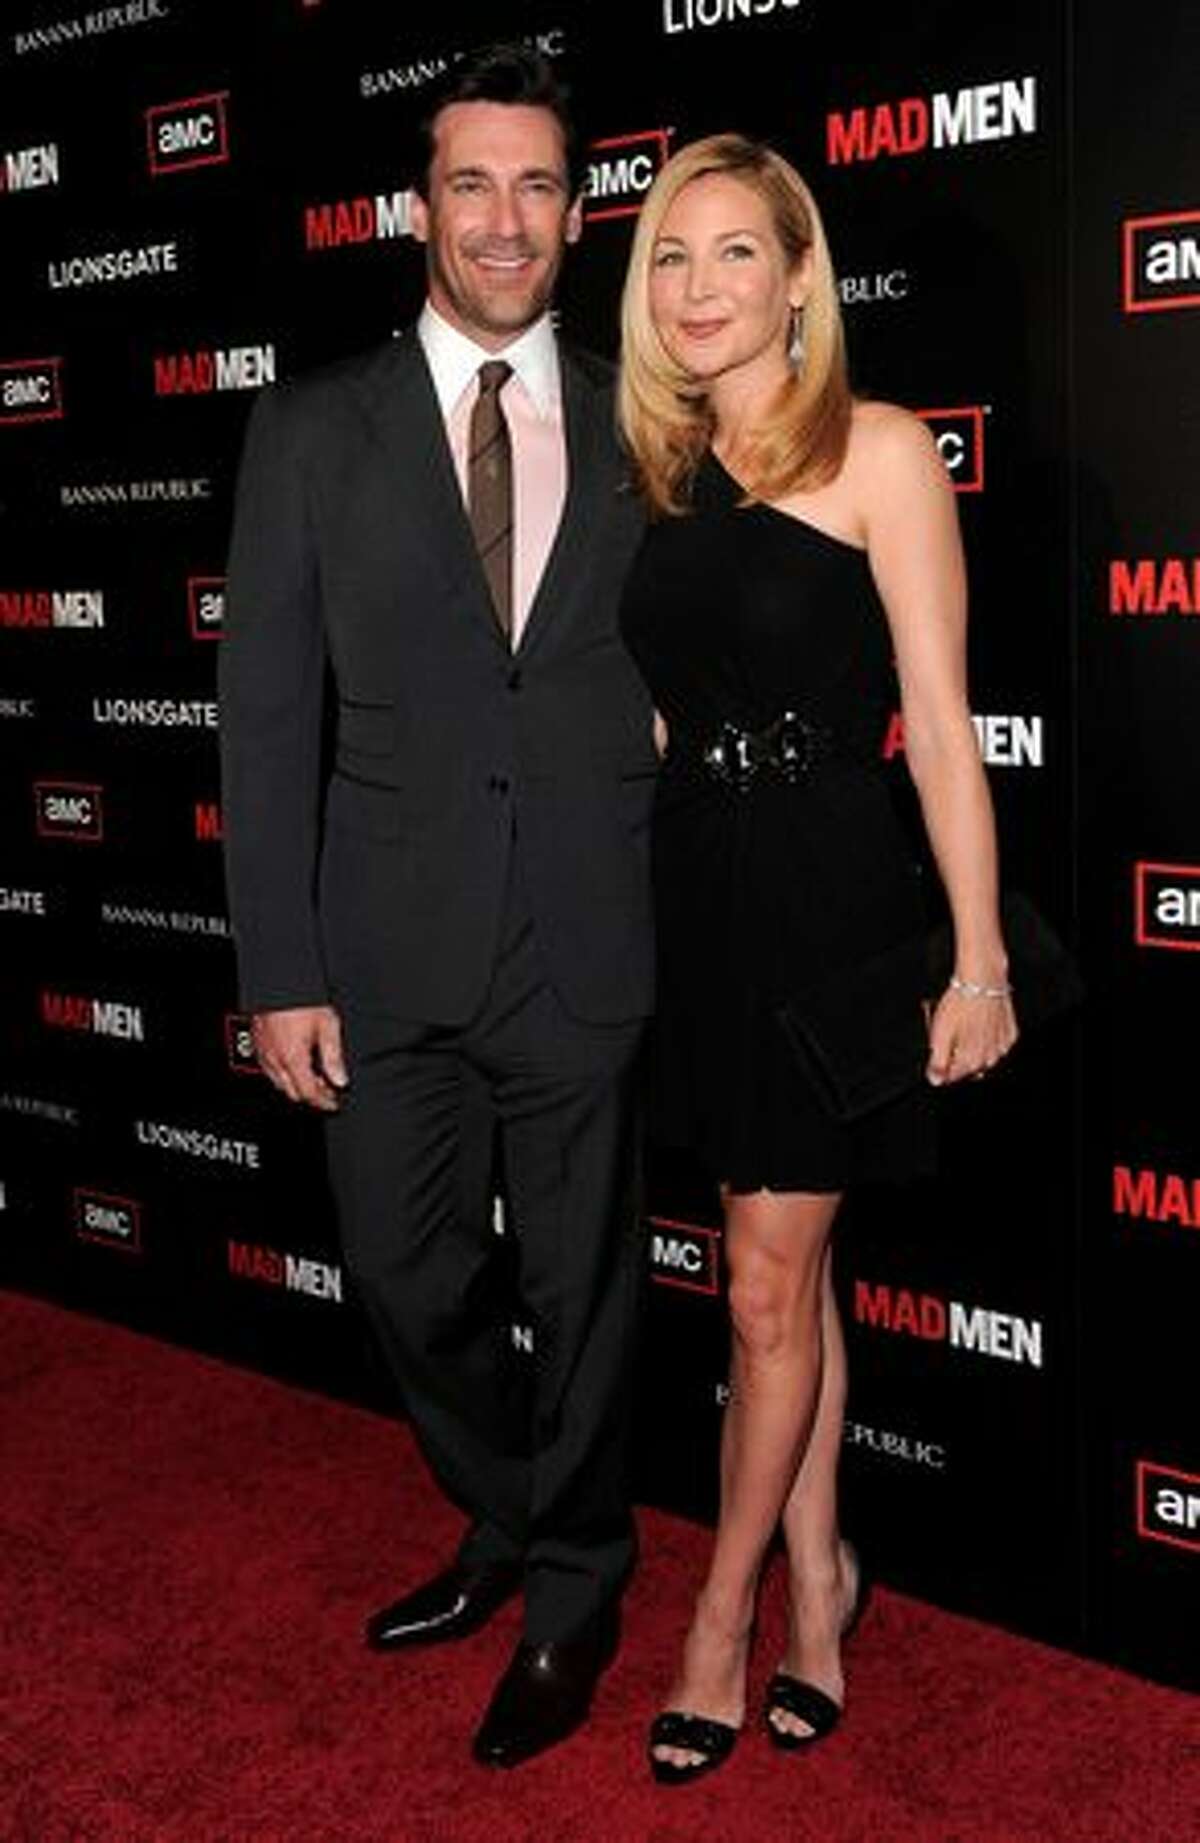 Actor Jon Hamm, who stars as Don Draper in "Mad Men", poses with his longtime girlfriend, actress Jennifer Westfeldt, at the show's season 4 premiere in Hollywood, California.